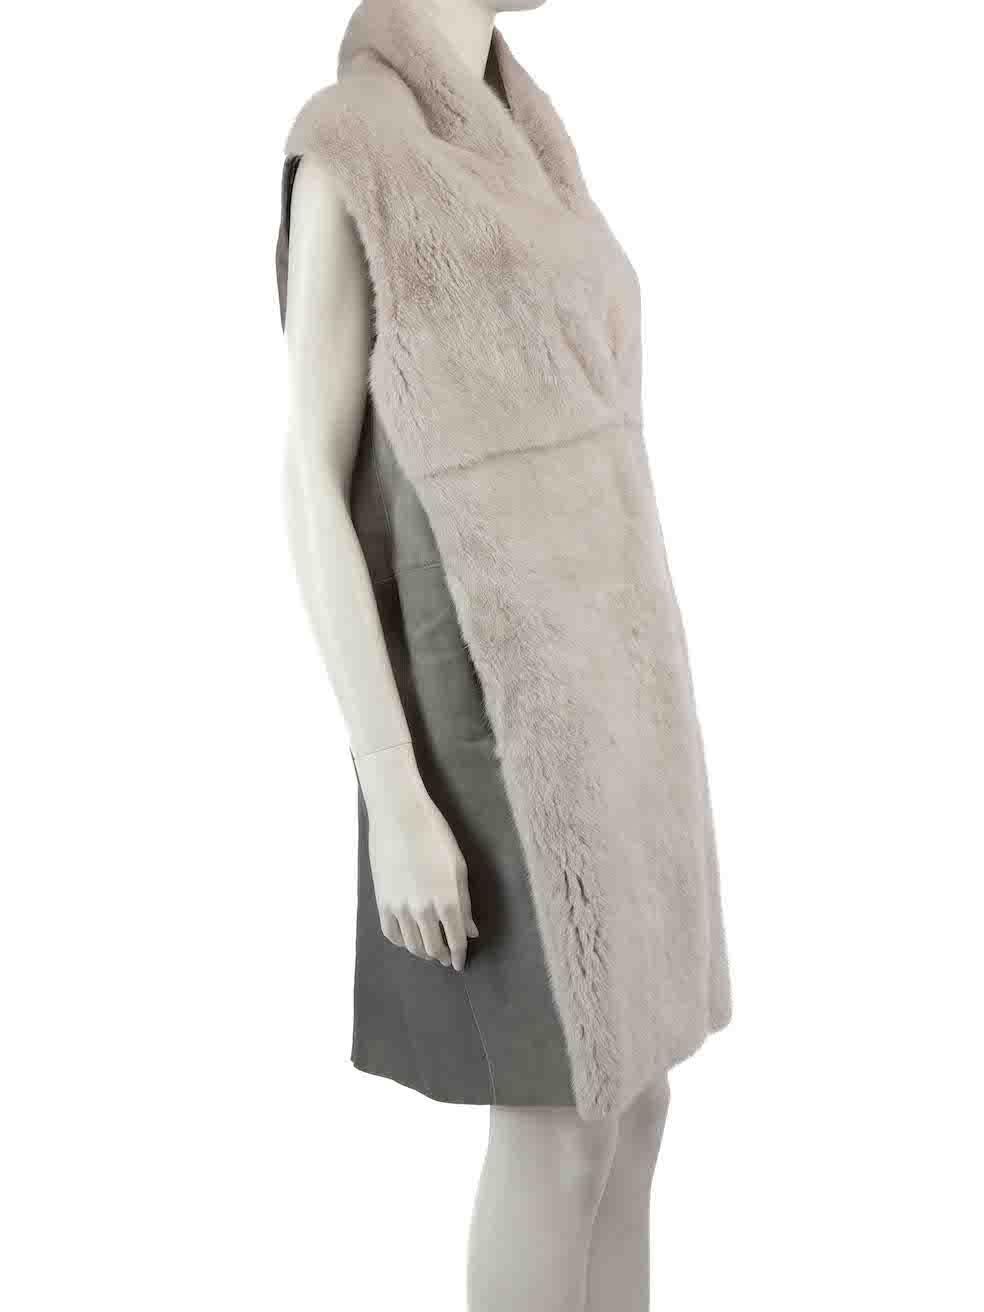 CONDITION is Very good. Minimal wear to jacket is evident. There is a hook missing from the centre front on this used Divine Cashmere designer resale item.
 
 
 
 Details
 
 
 Grey
 
 Mink fur
 
 Vest
 
 Hook fastening
 
 Back leather panel
 
 
 
 
